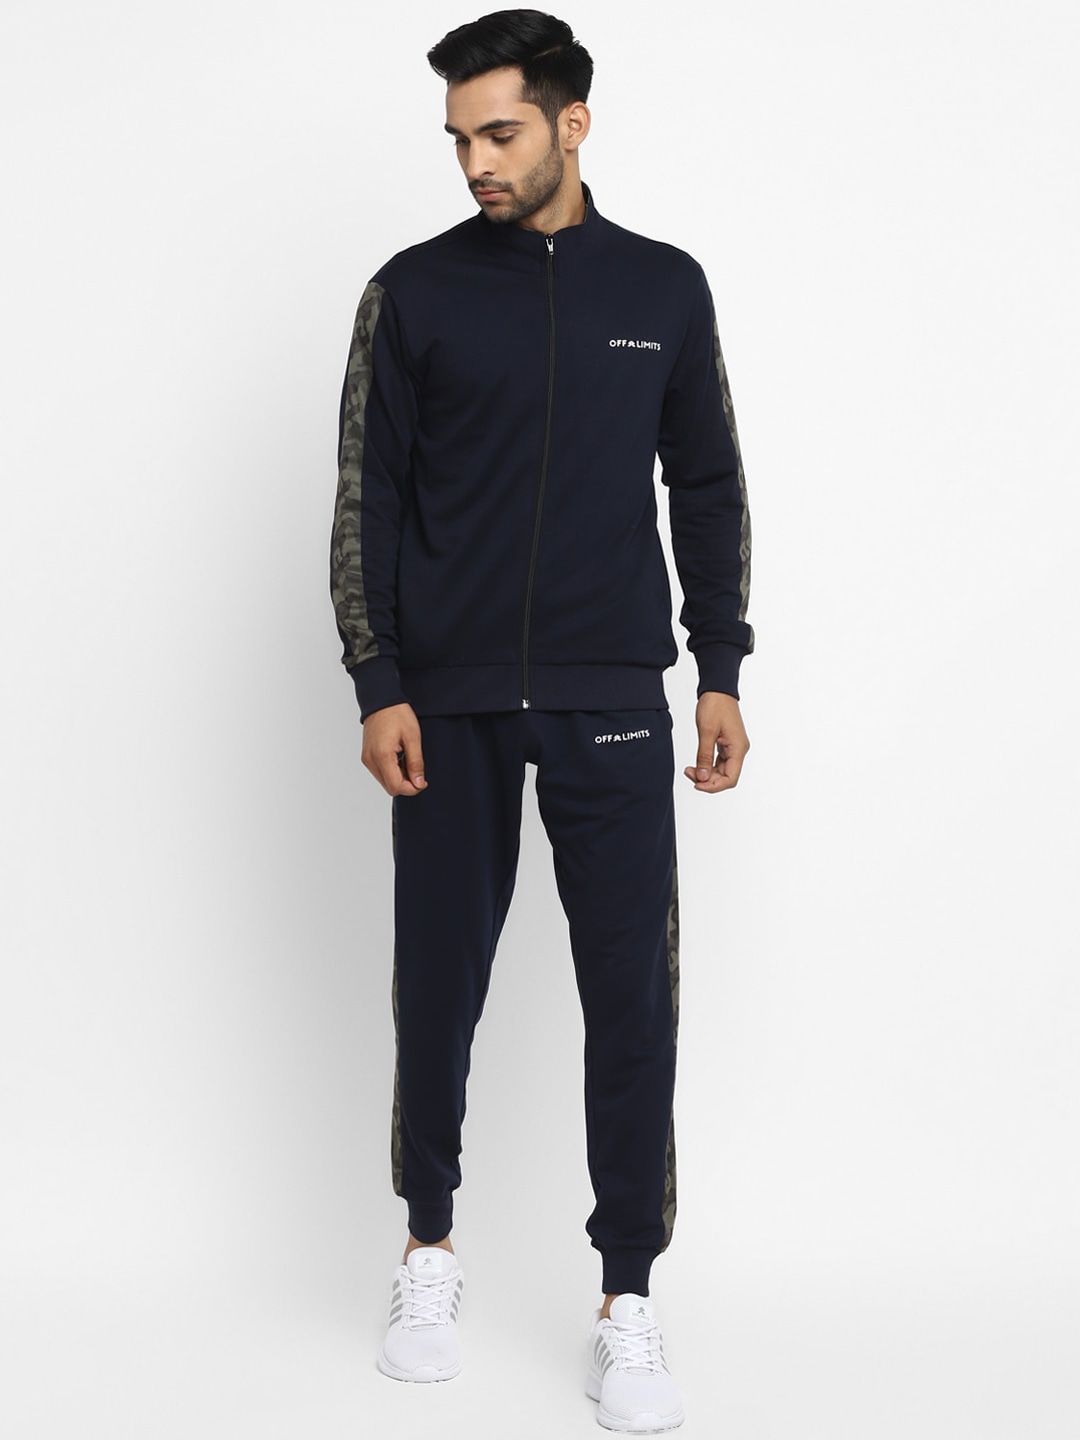 Clothing Tracksuits | OFF LIMITS Men Navy Blue Solid Tracksuit - CL67062